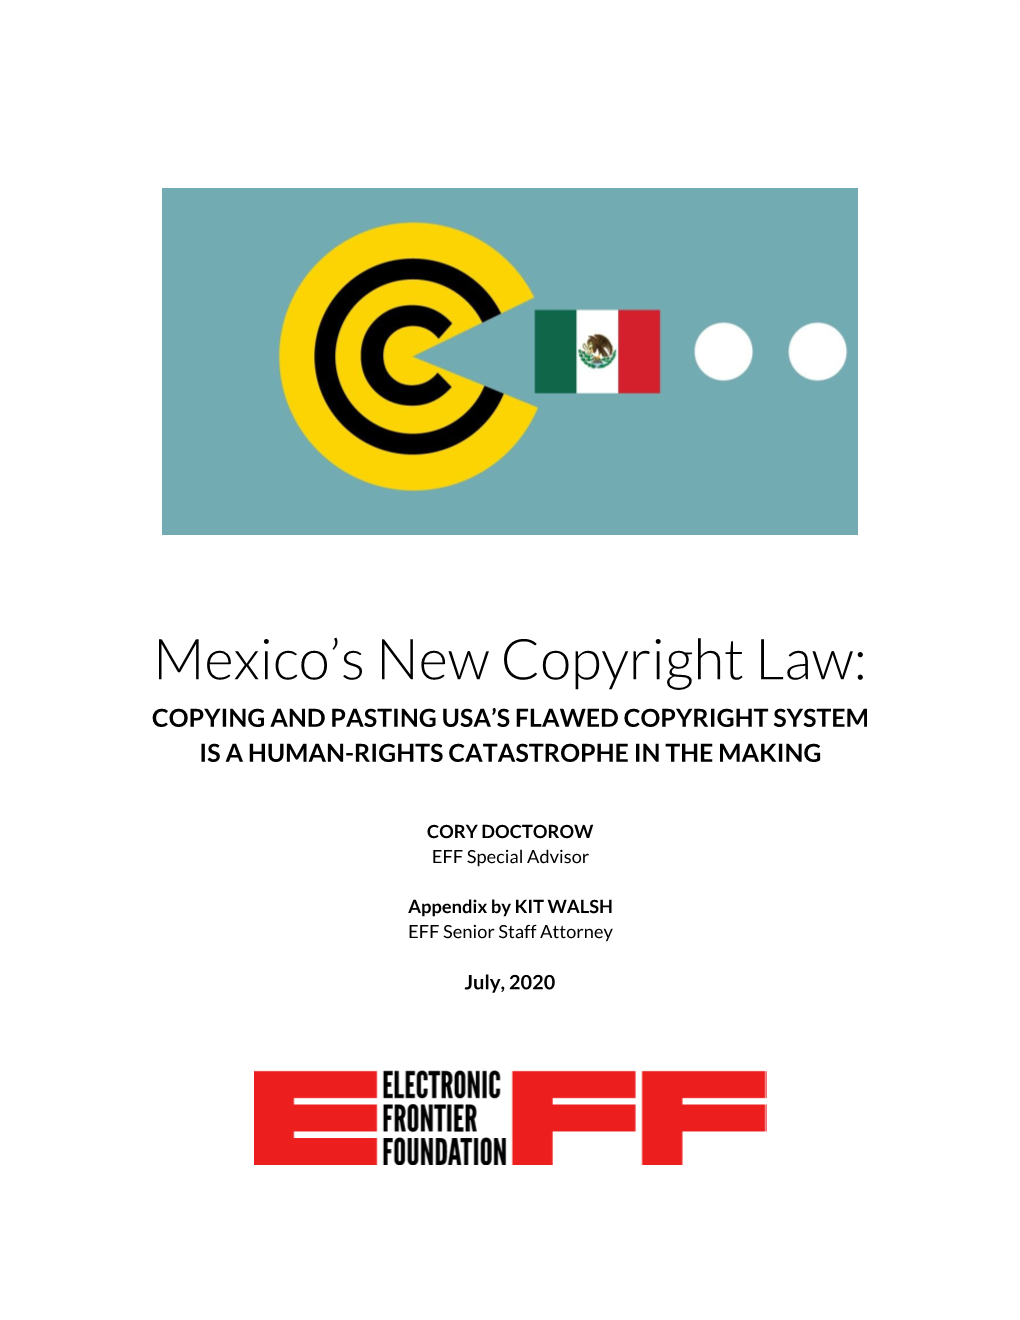 Mexico's New Copyright Law